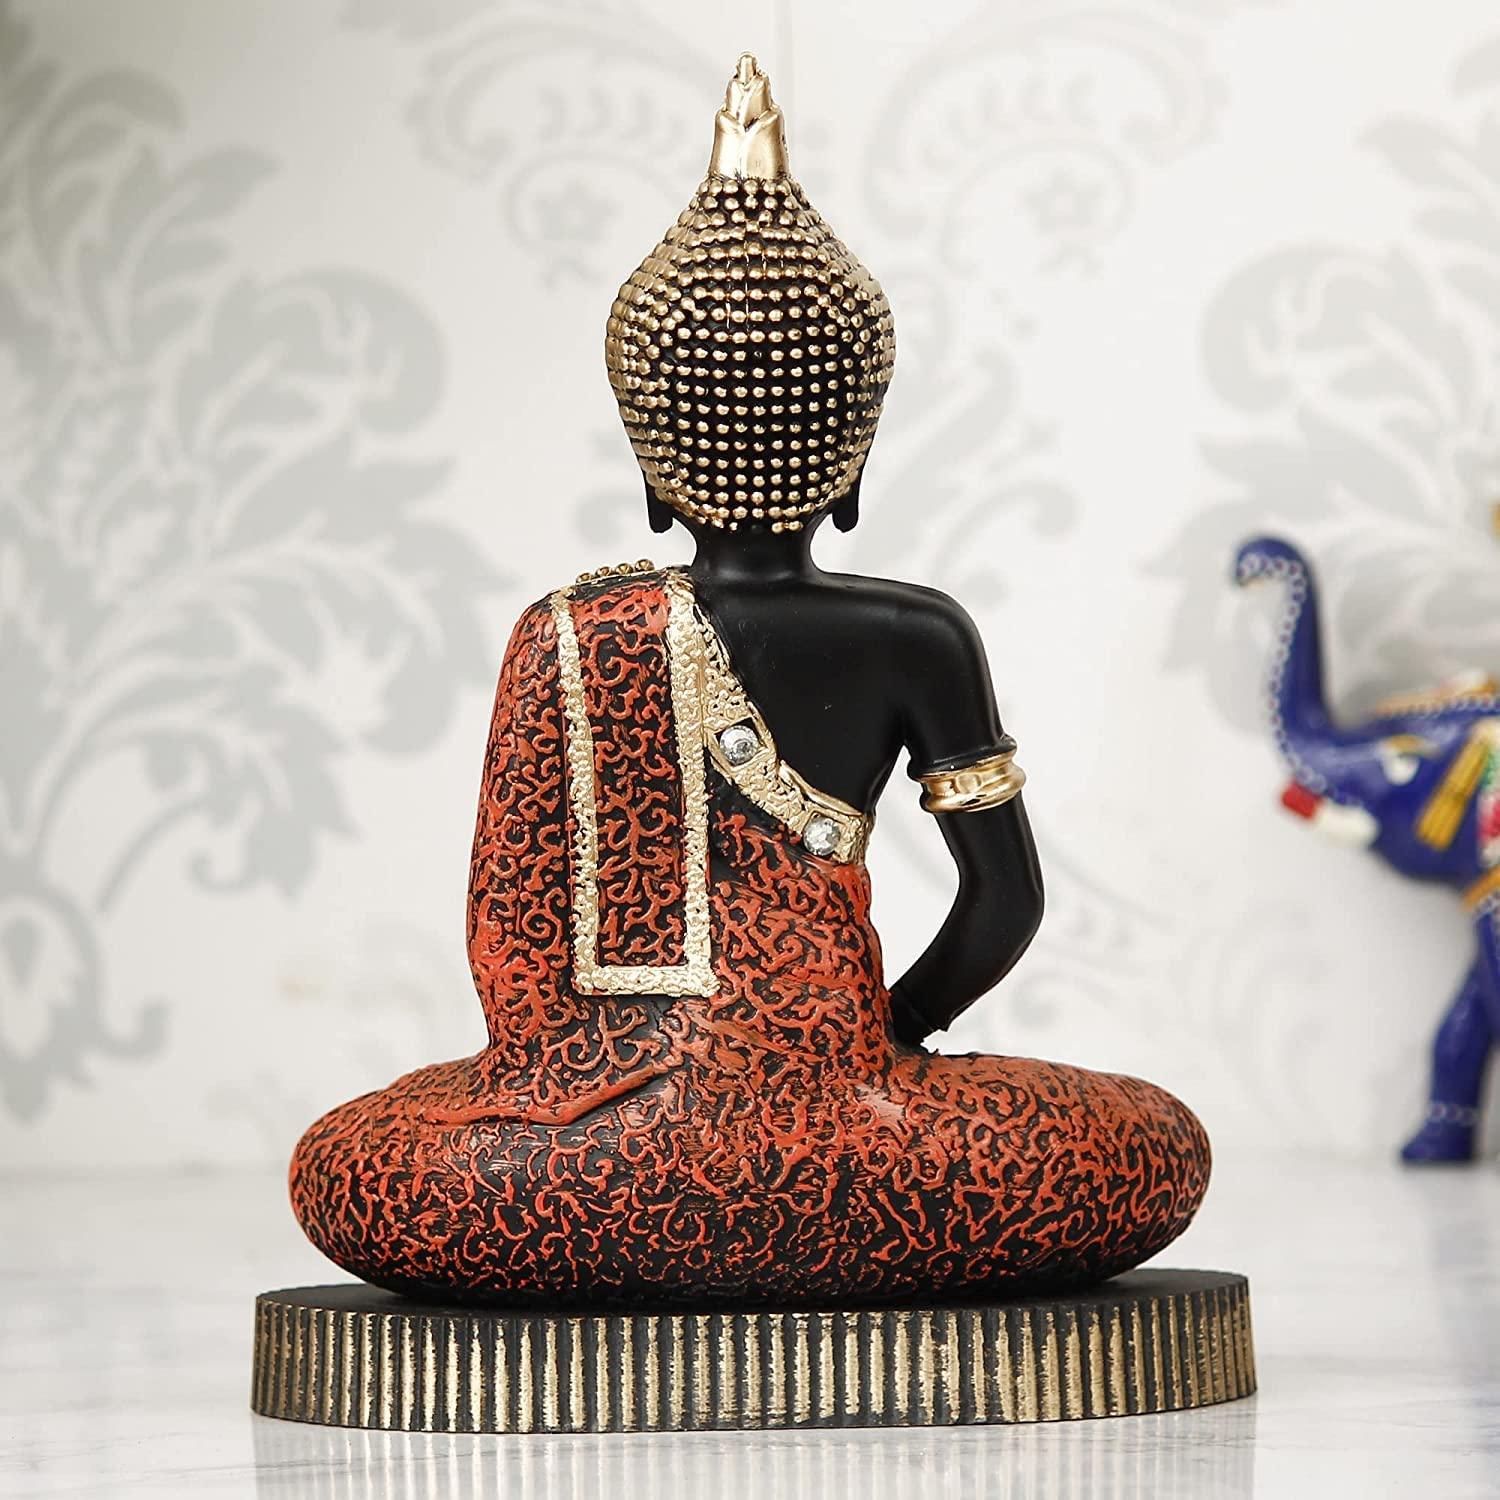 Buy Handmade Metal Lord Buddha Statue/Idol for Home-Office Decor, Car  Dashboard Gift Item (5.5 Inch) (Gold) Online - Get 55% Off